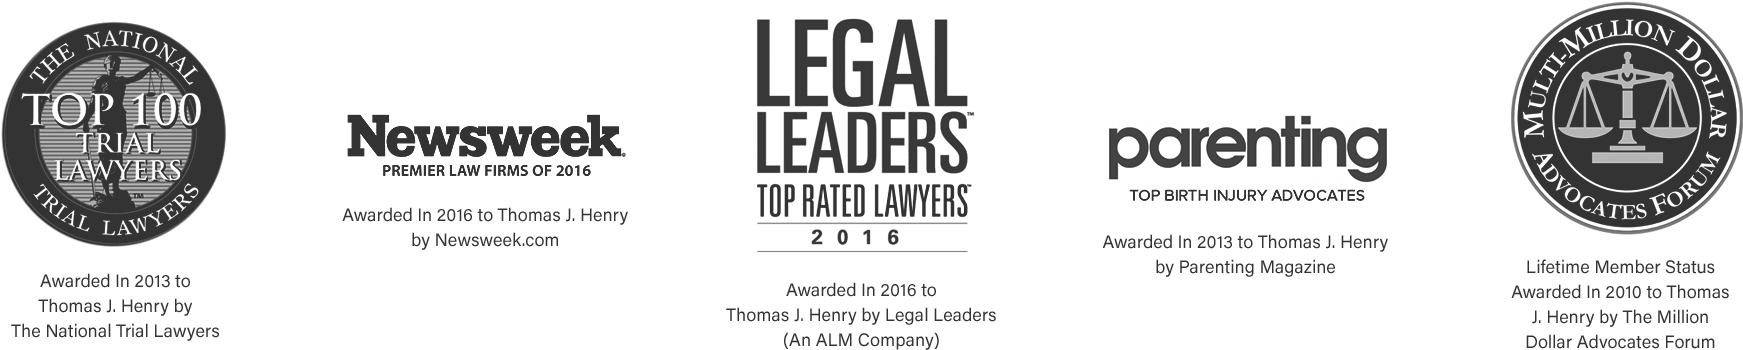 Law Firm Awardsand Accolades Banner PNG